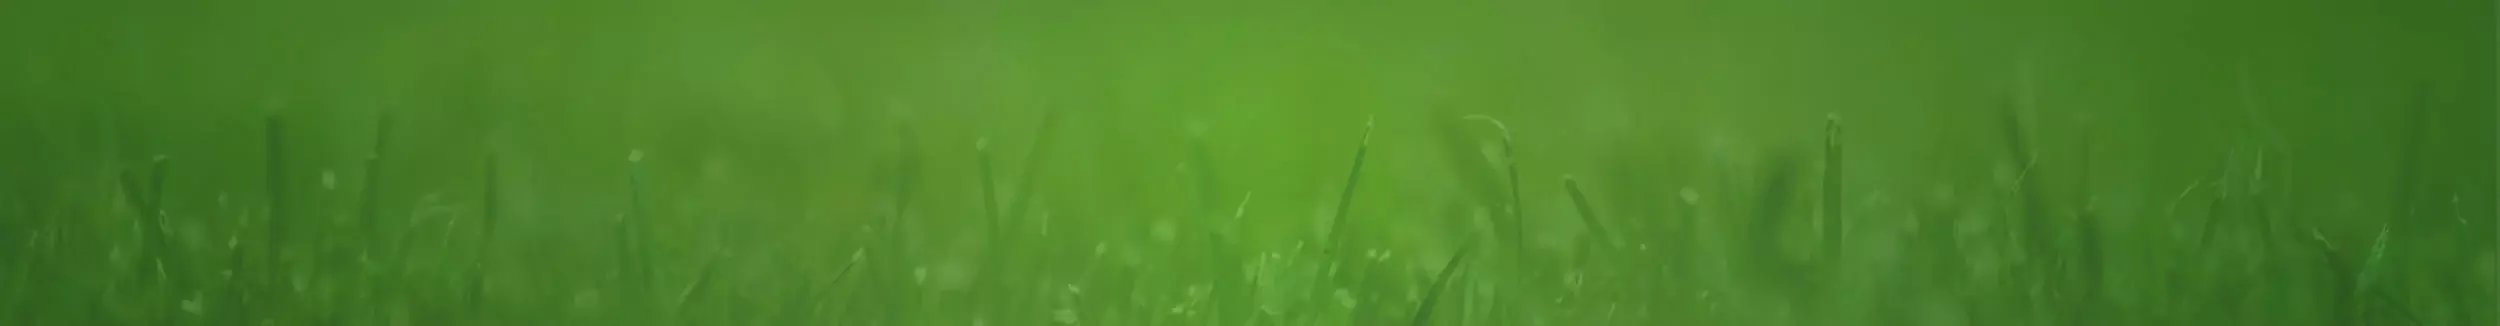 Close-up of grass on green background.